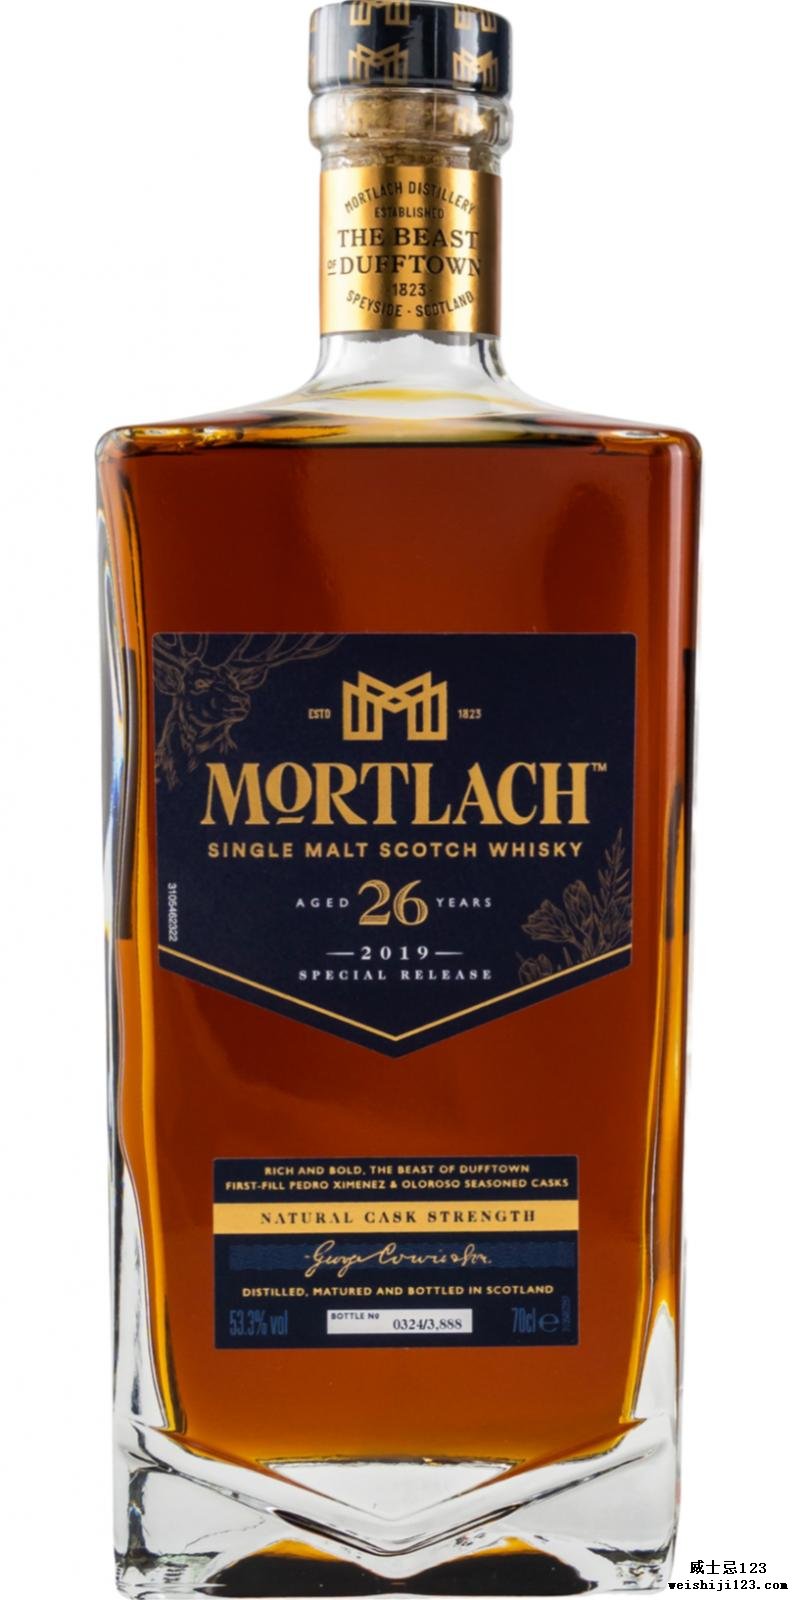 Mortlach 26-year-old